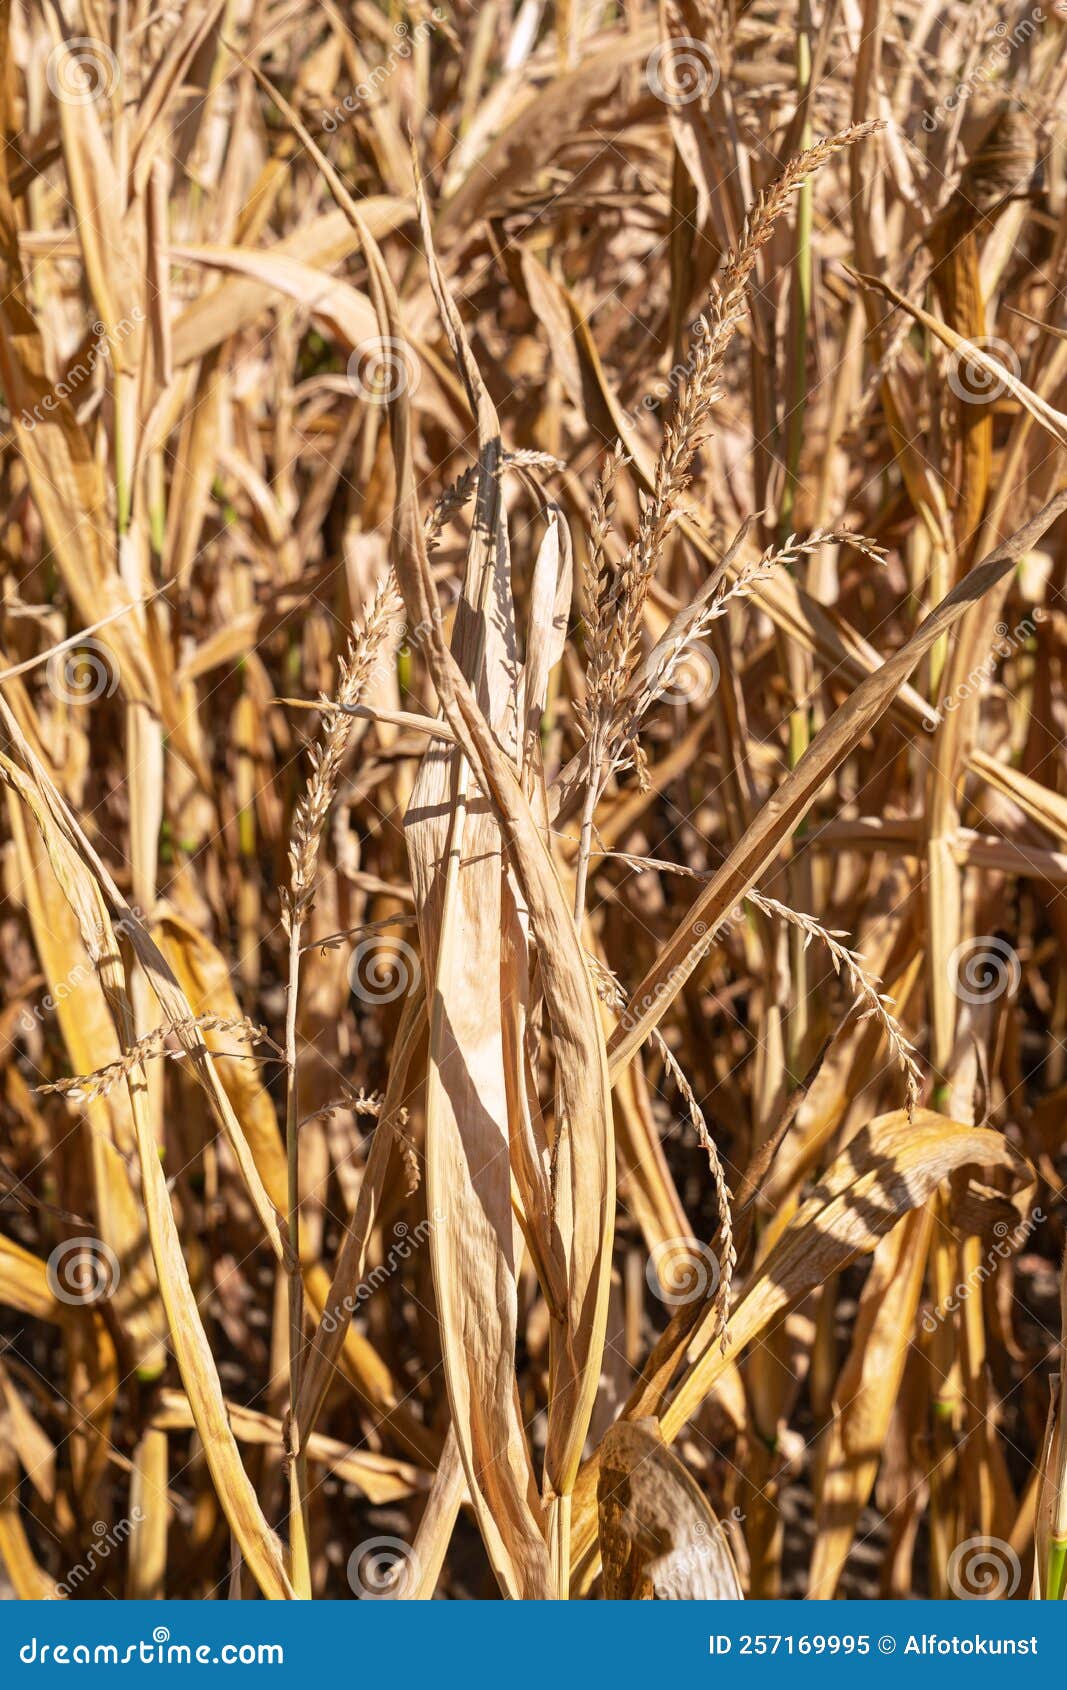 withered corn plants, aridity in germany